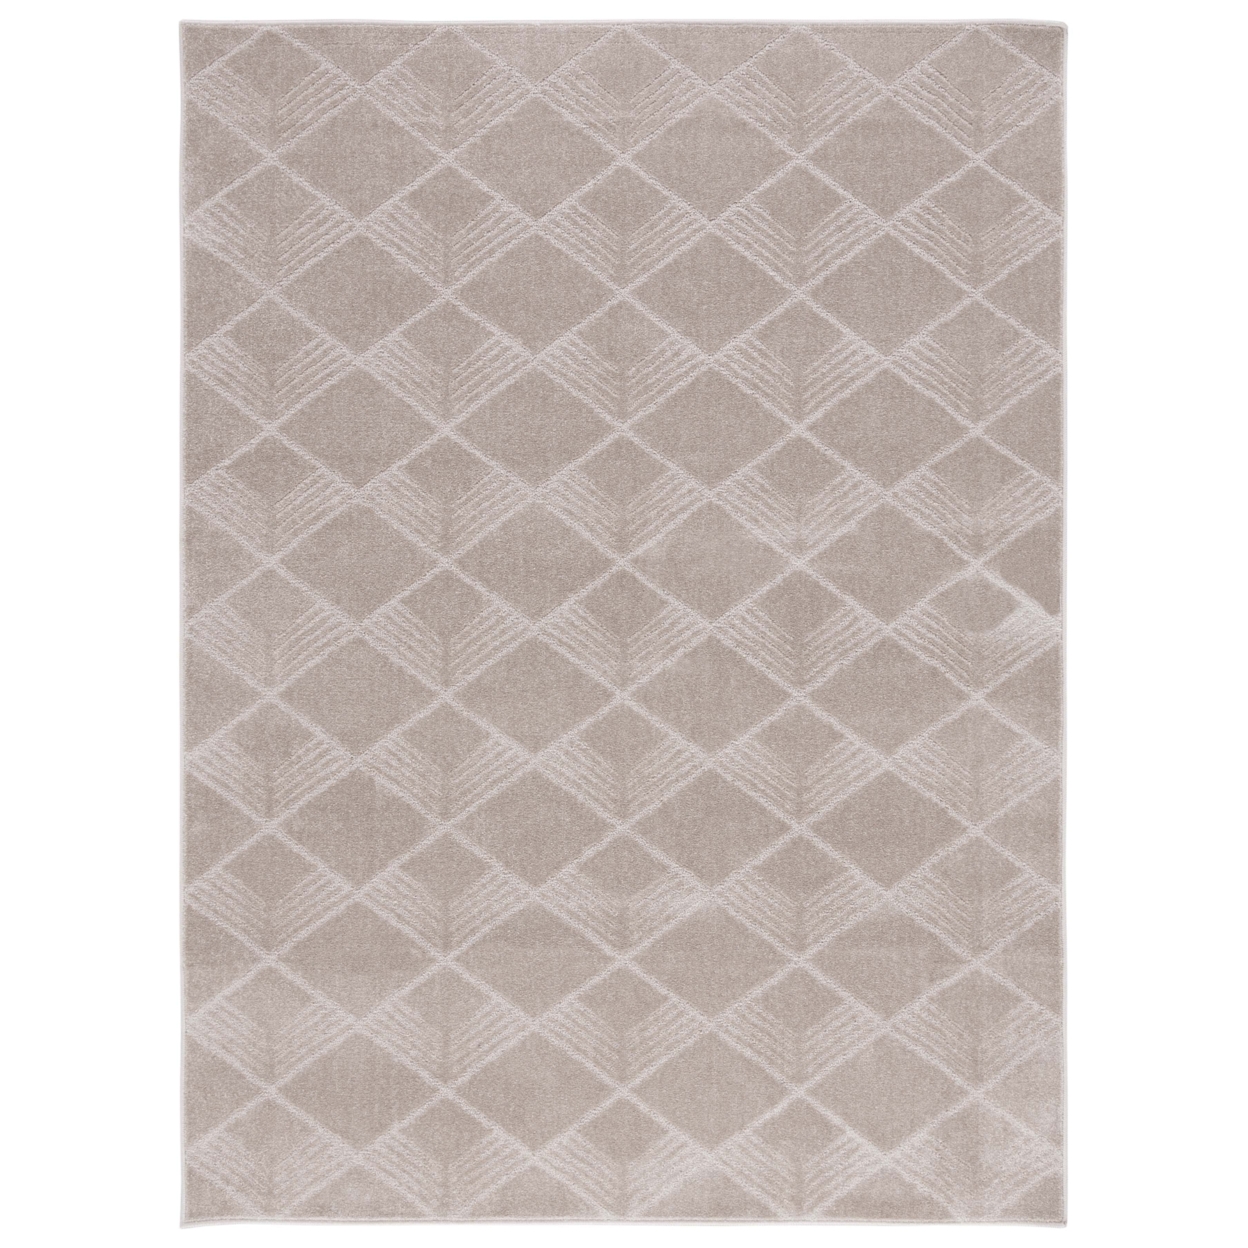 Safavieh PNS414B Pattern And Solid Beige - Silver / Ivory, 5'-3 X 7'-6 Rectangle